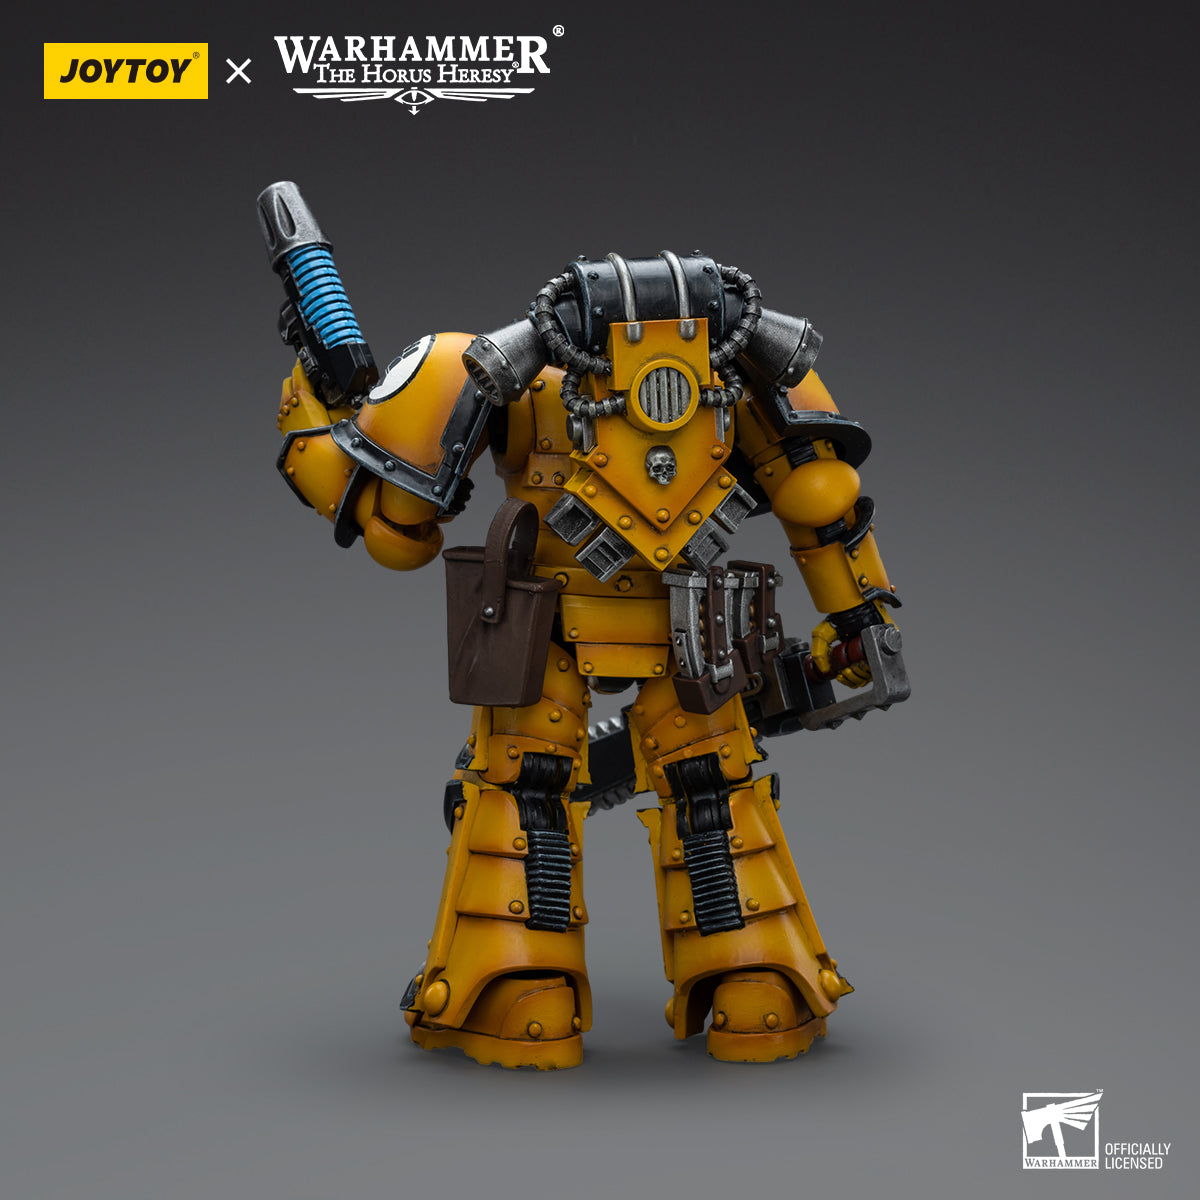 Warhammer Collectibles: 1/18 Scale Imperial Fists Legion MkIII Despoiler Squad Sgt with Pistol